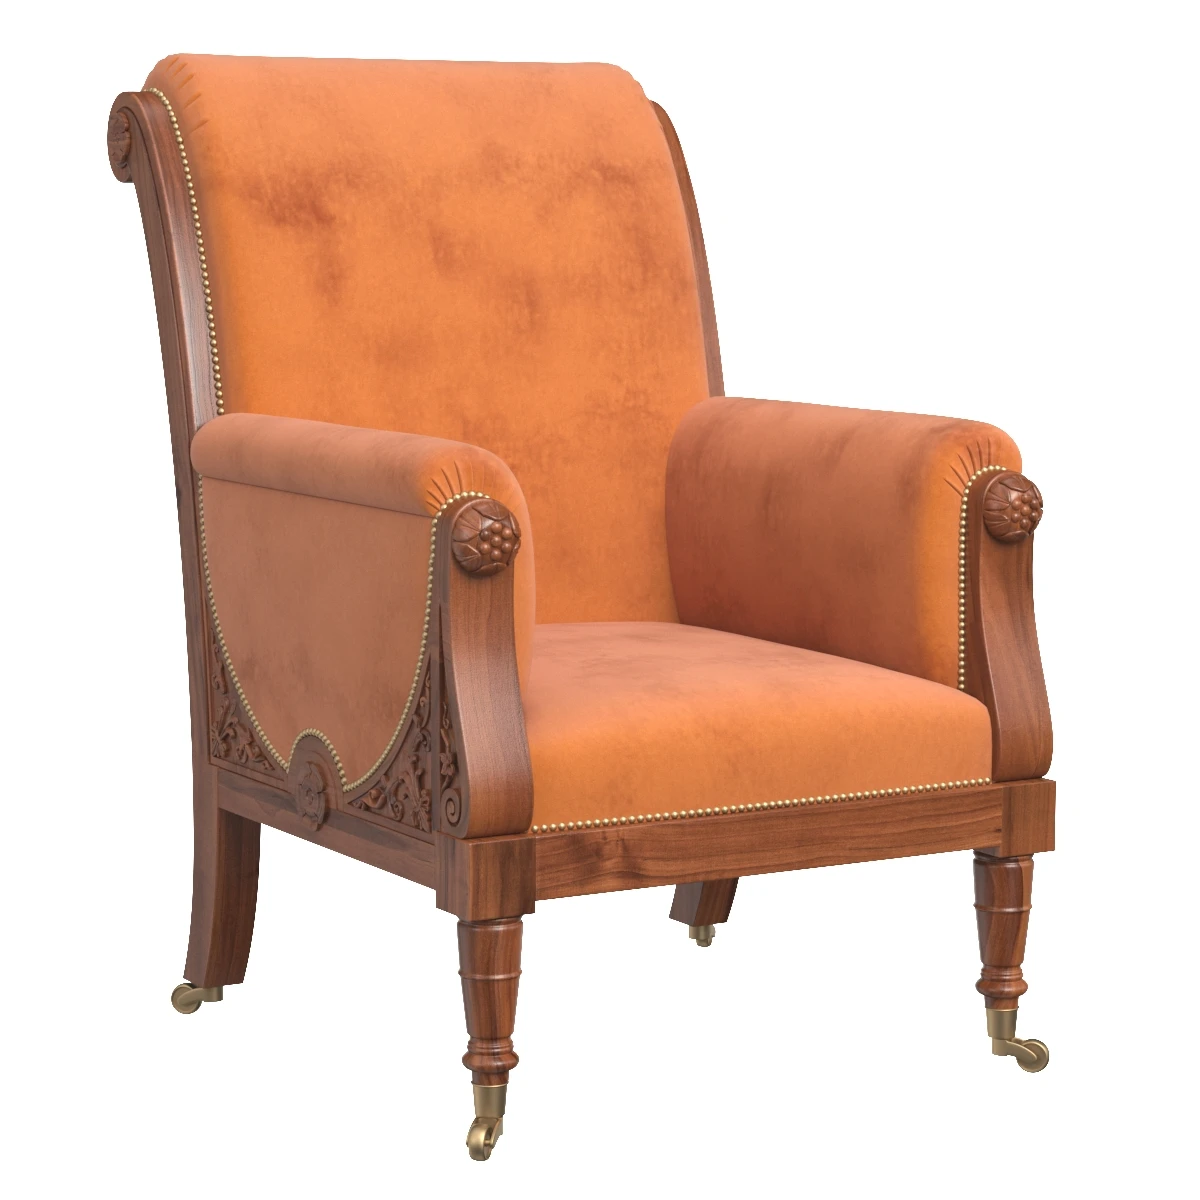 An Exceptional late George IV Carved Mahogany Chair 3D Model_01